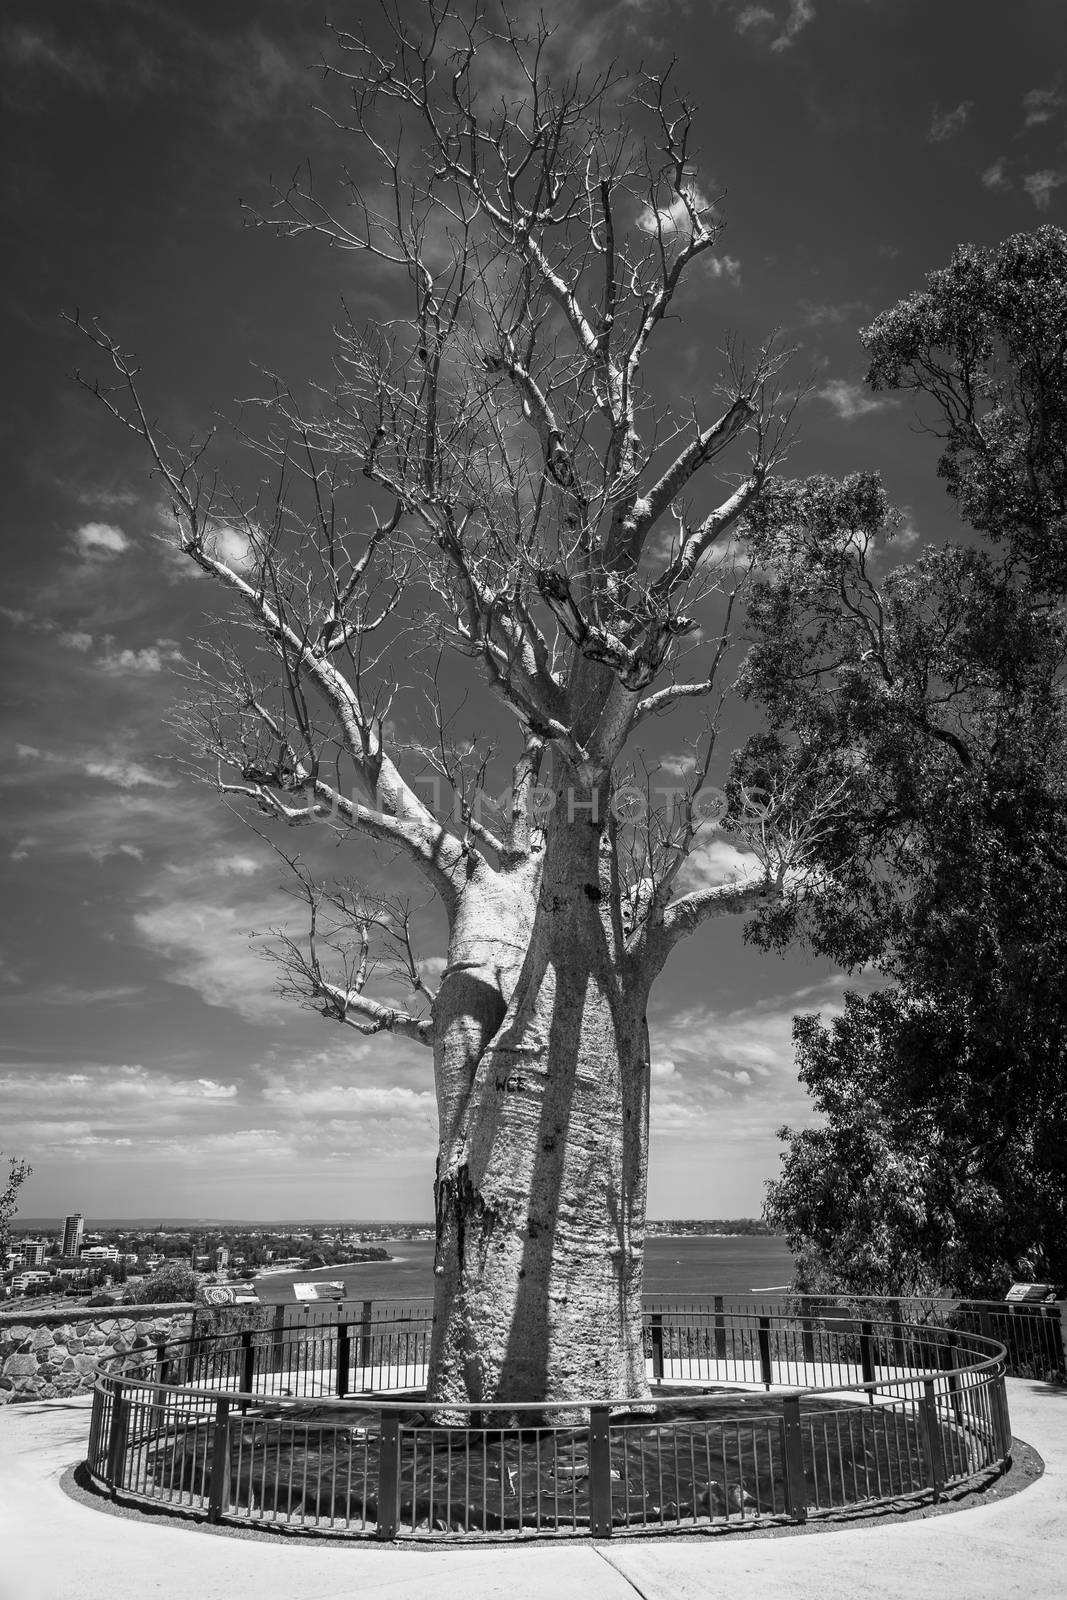 Black and White of Adansonia digitata alias Baobab tree without leafs in Kingspark in Perth